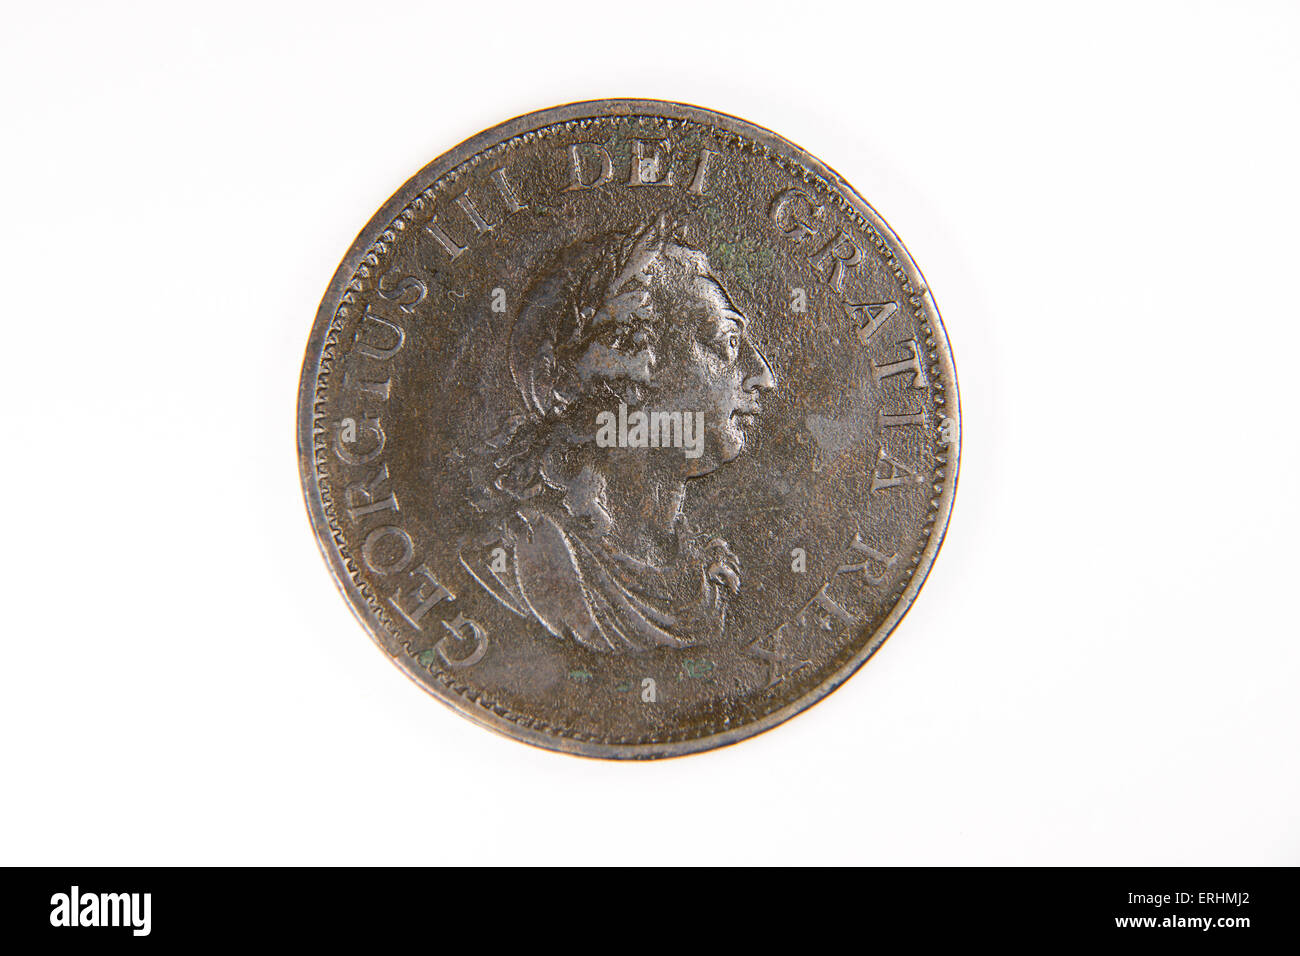 Old bronze coin with portrait of king on a white background Stock Photo